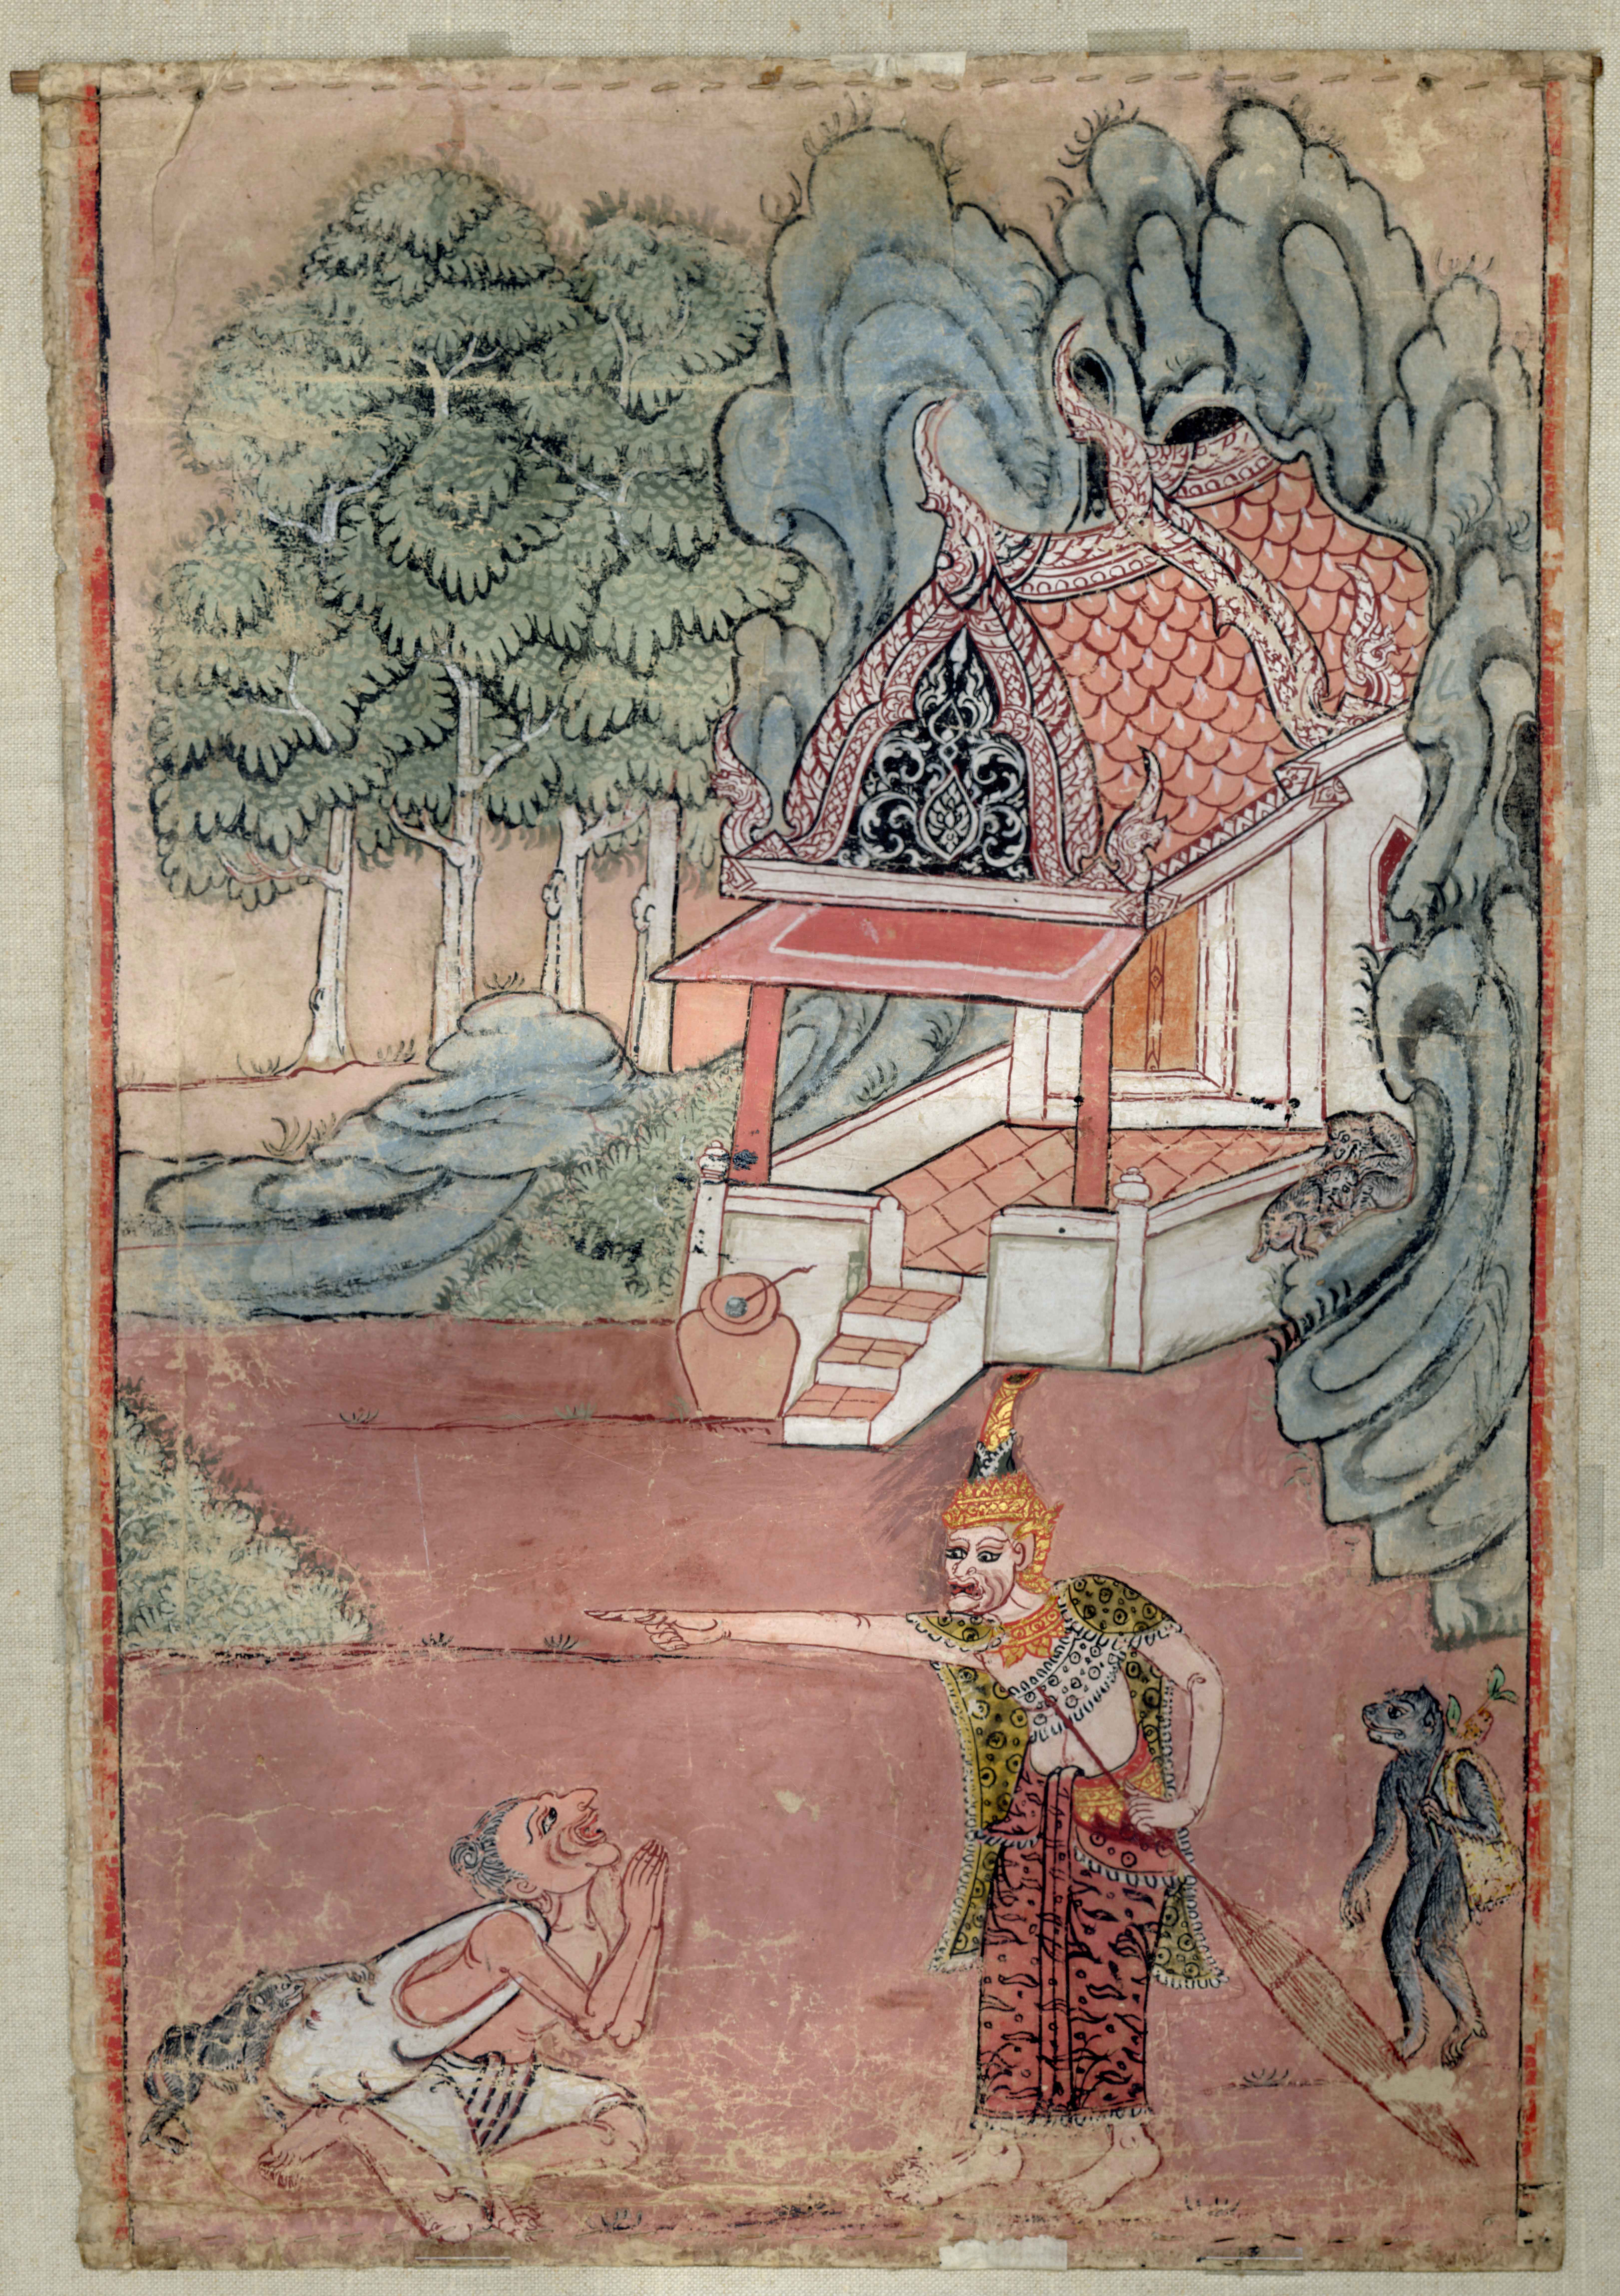 A figure of a man with a long arm pointing left, suppliant figure before him and a monkey behind him. There is a red and White House and trees behind the figures and monkey. 